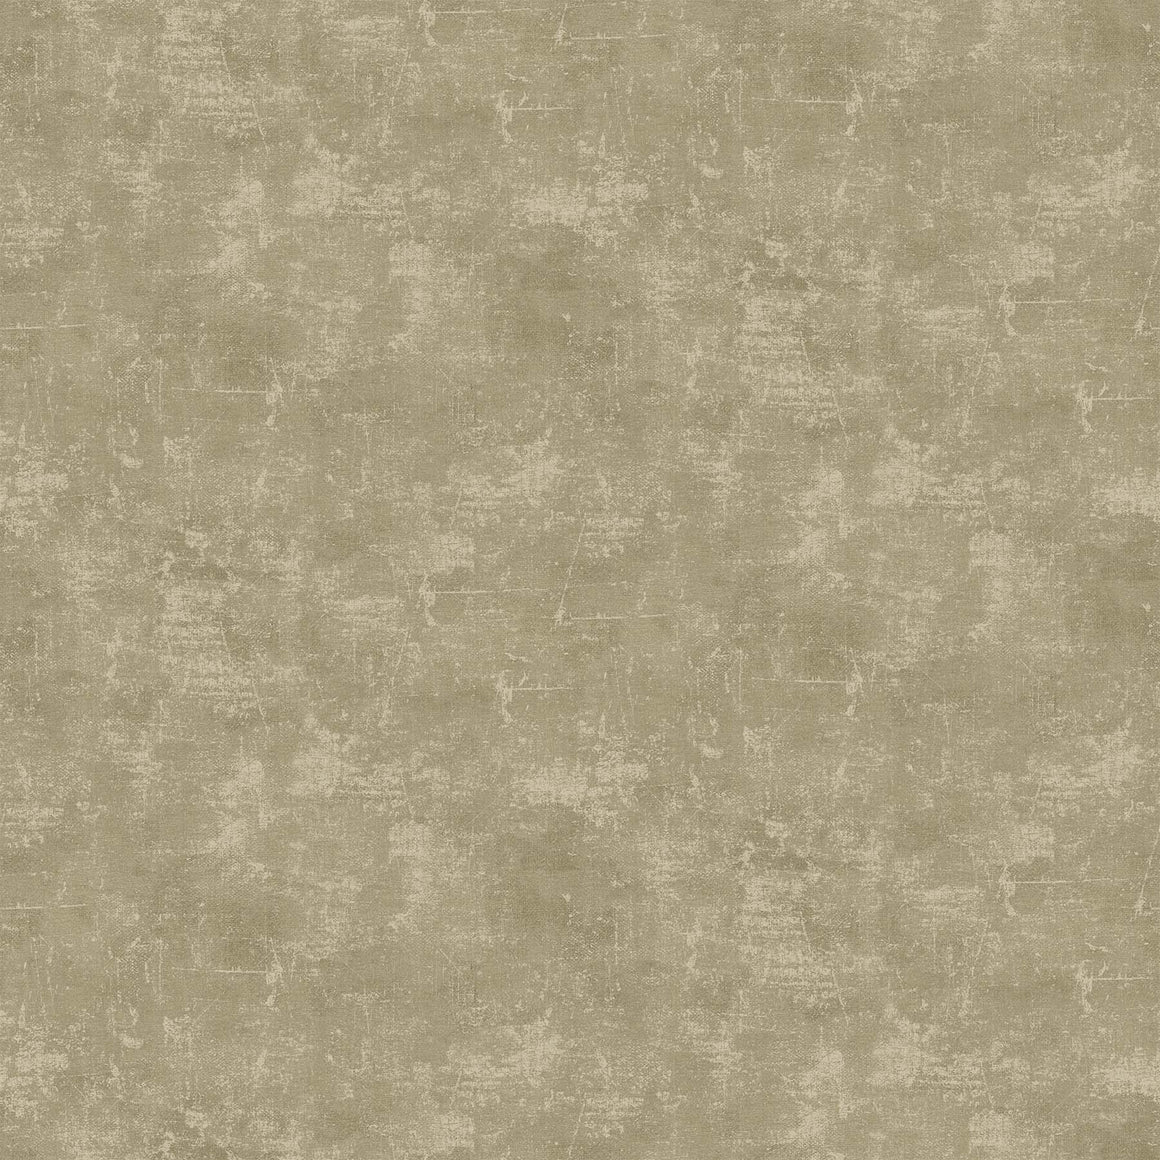 Brown Rice - Canvas Texture - 9030-14, Designer Fabric, Northcott, [variant_title] - Mad About Patchwork